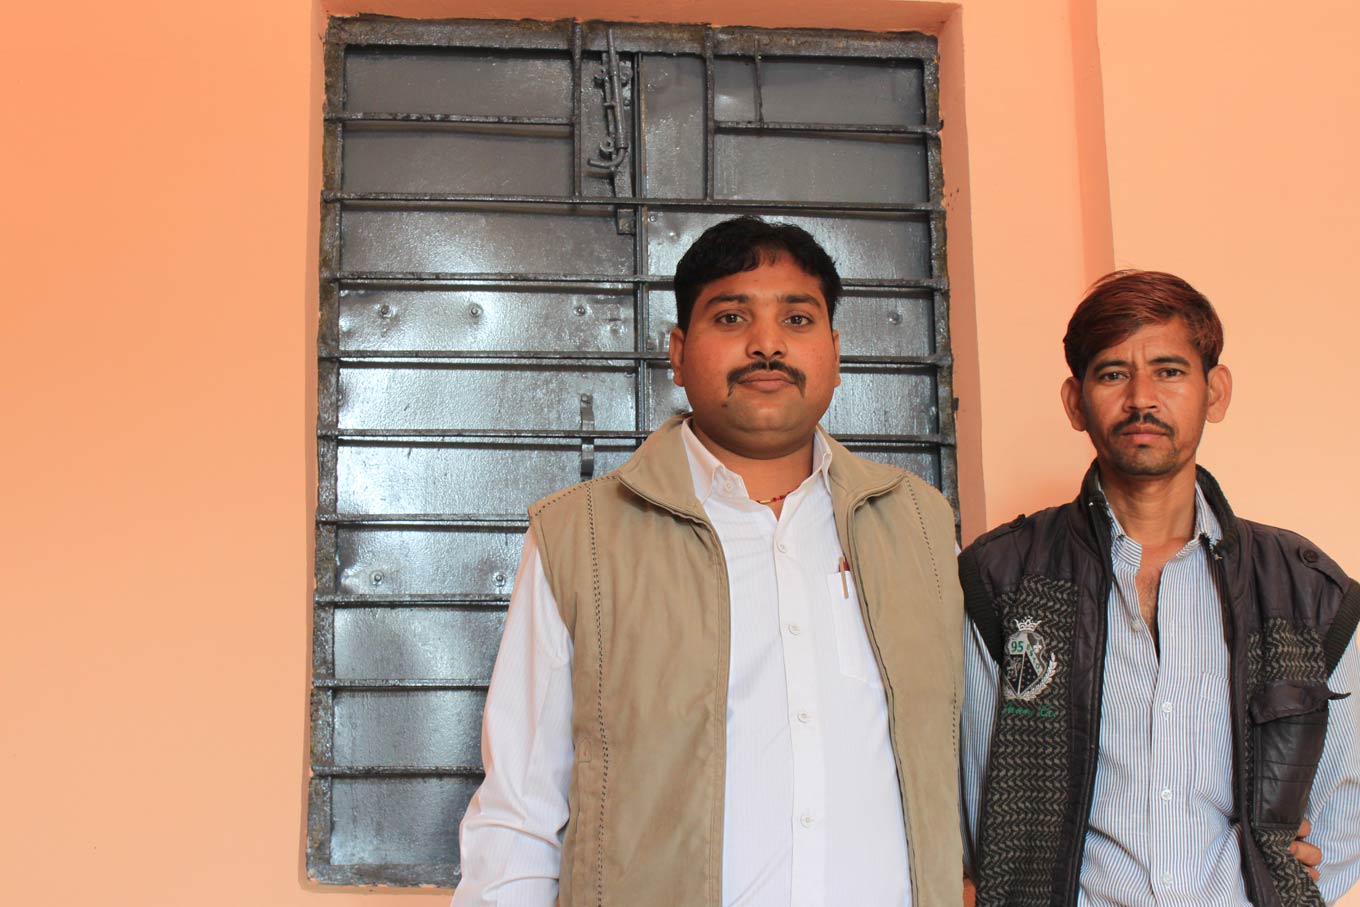 Harendra Gurjar, a GRS in Madhya Pradesh, kept paper records during the week, then on weekends travelled to the nearest city and did his data entry at an internet cafe.